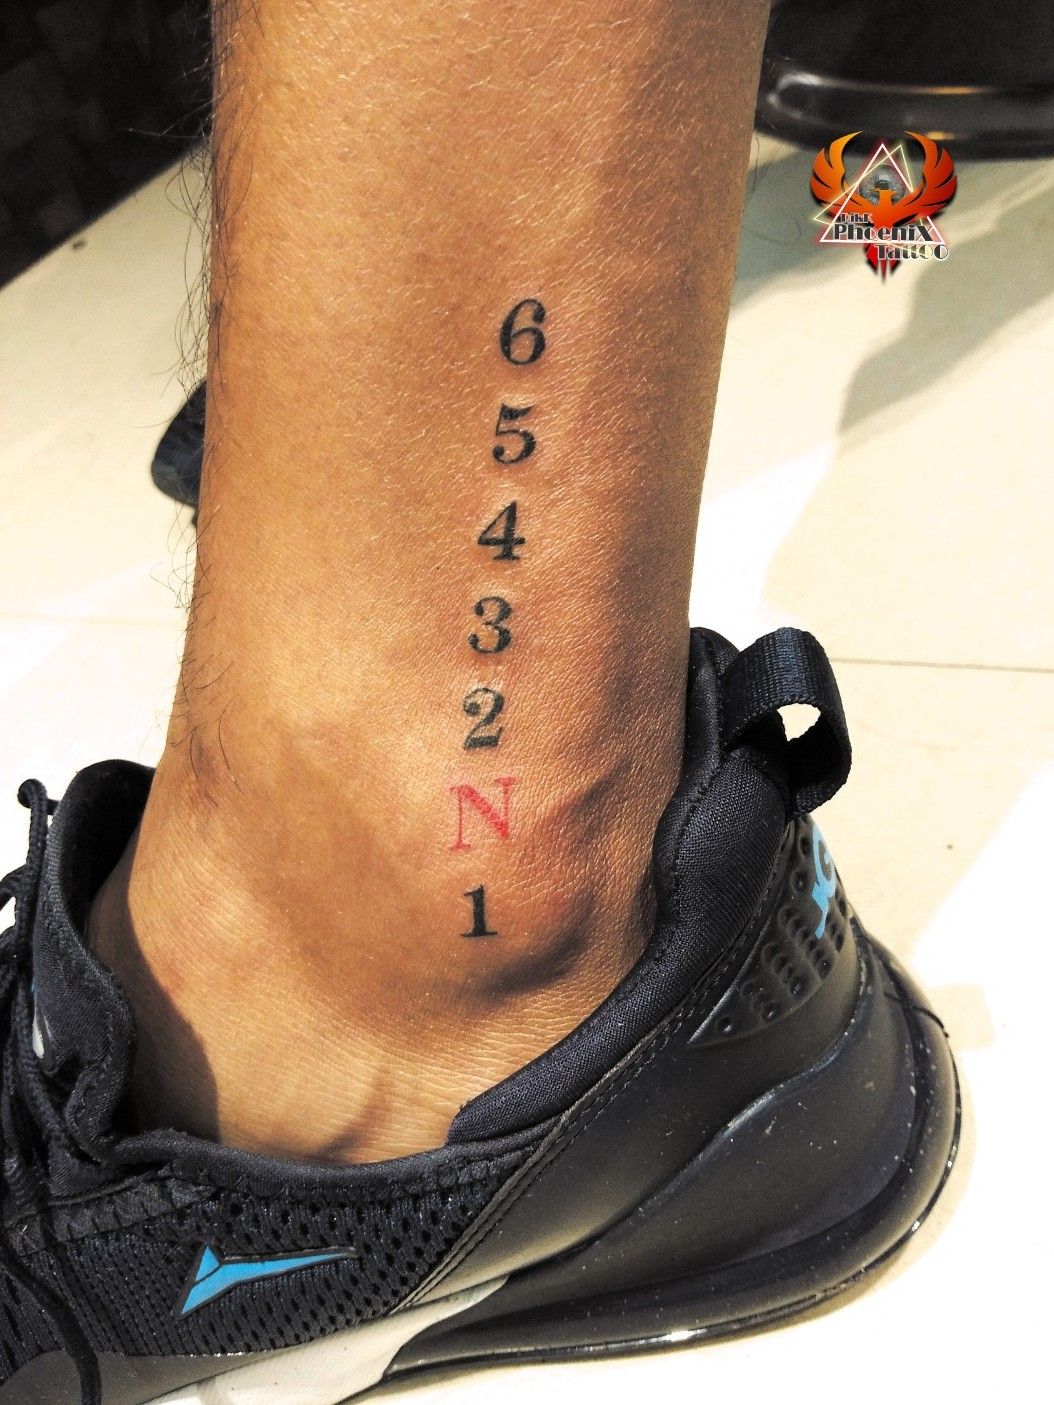 1n23456 tattoo meaning